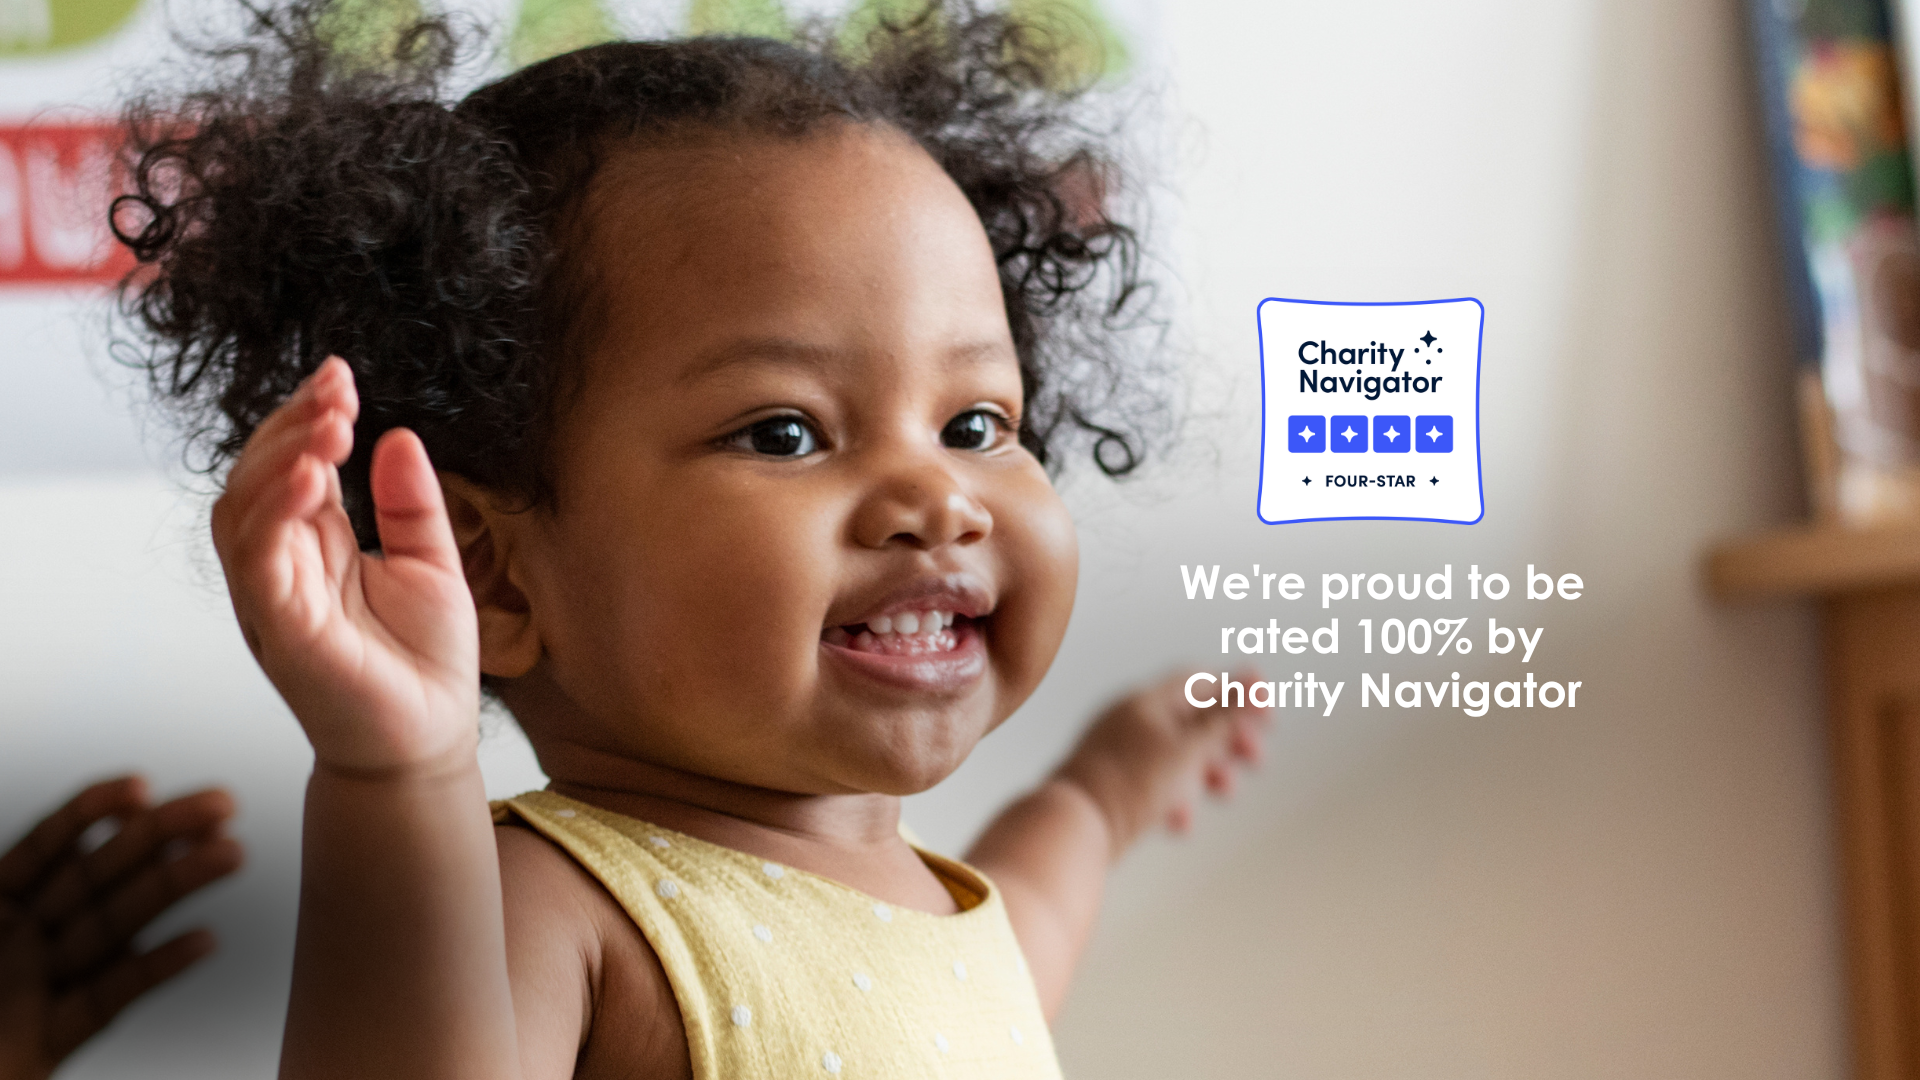 CureSearch for Children's Cancer is rated 100% by Charity Navigator